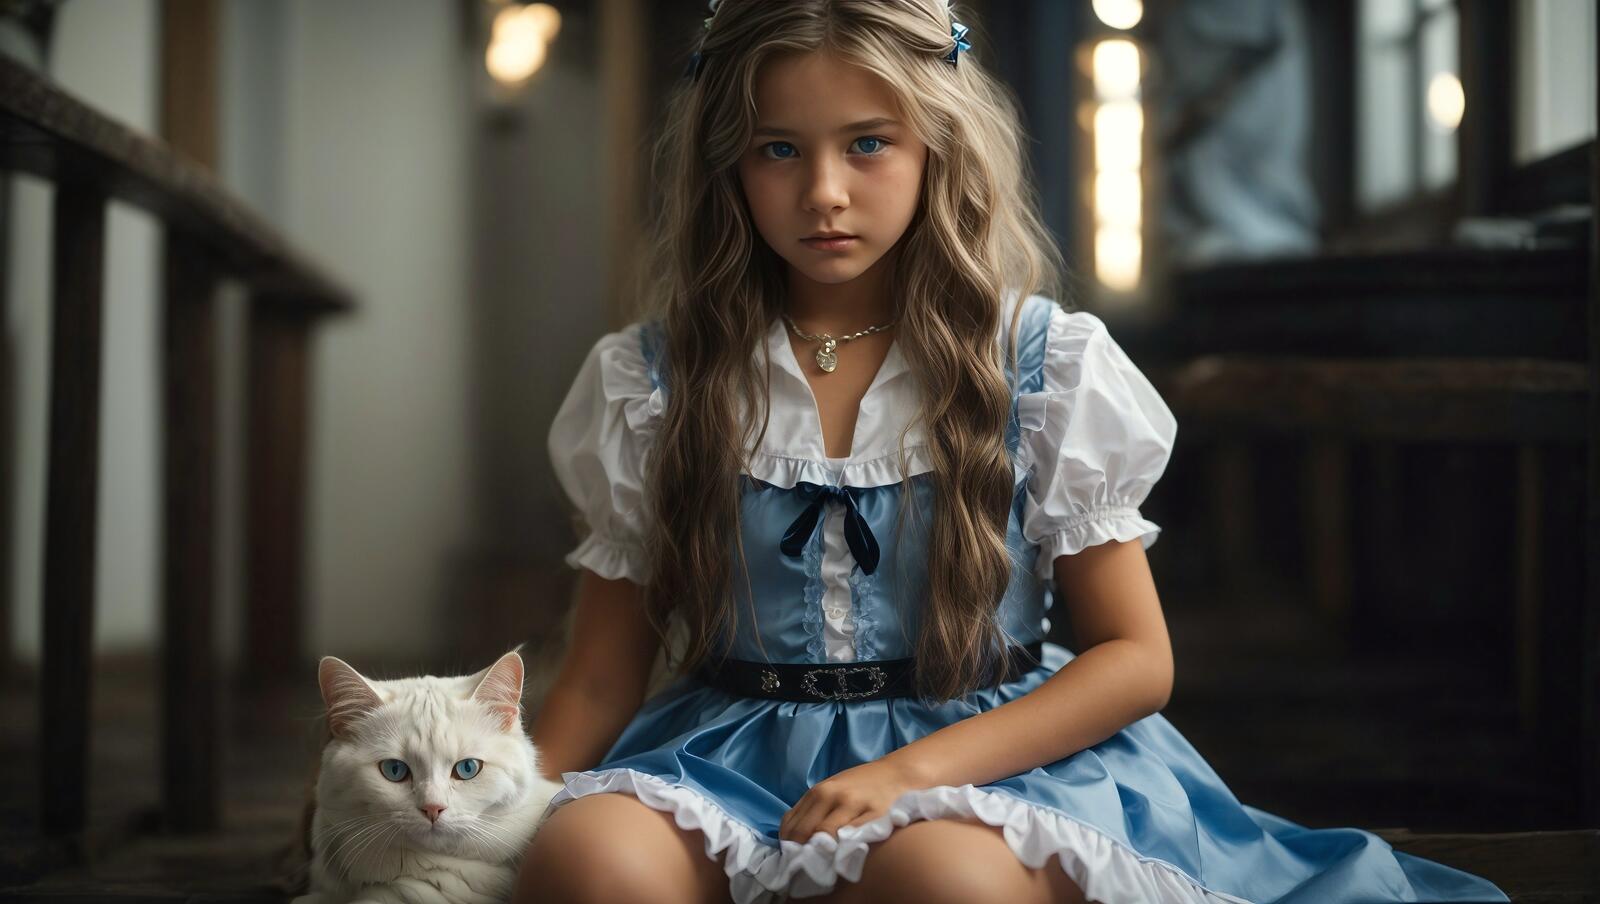 Free photo A young girl in period costume sits next to a cat